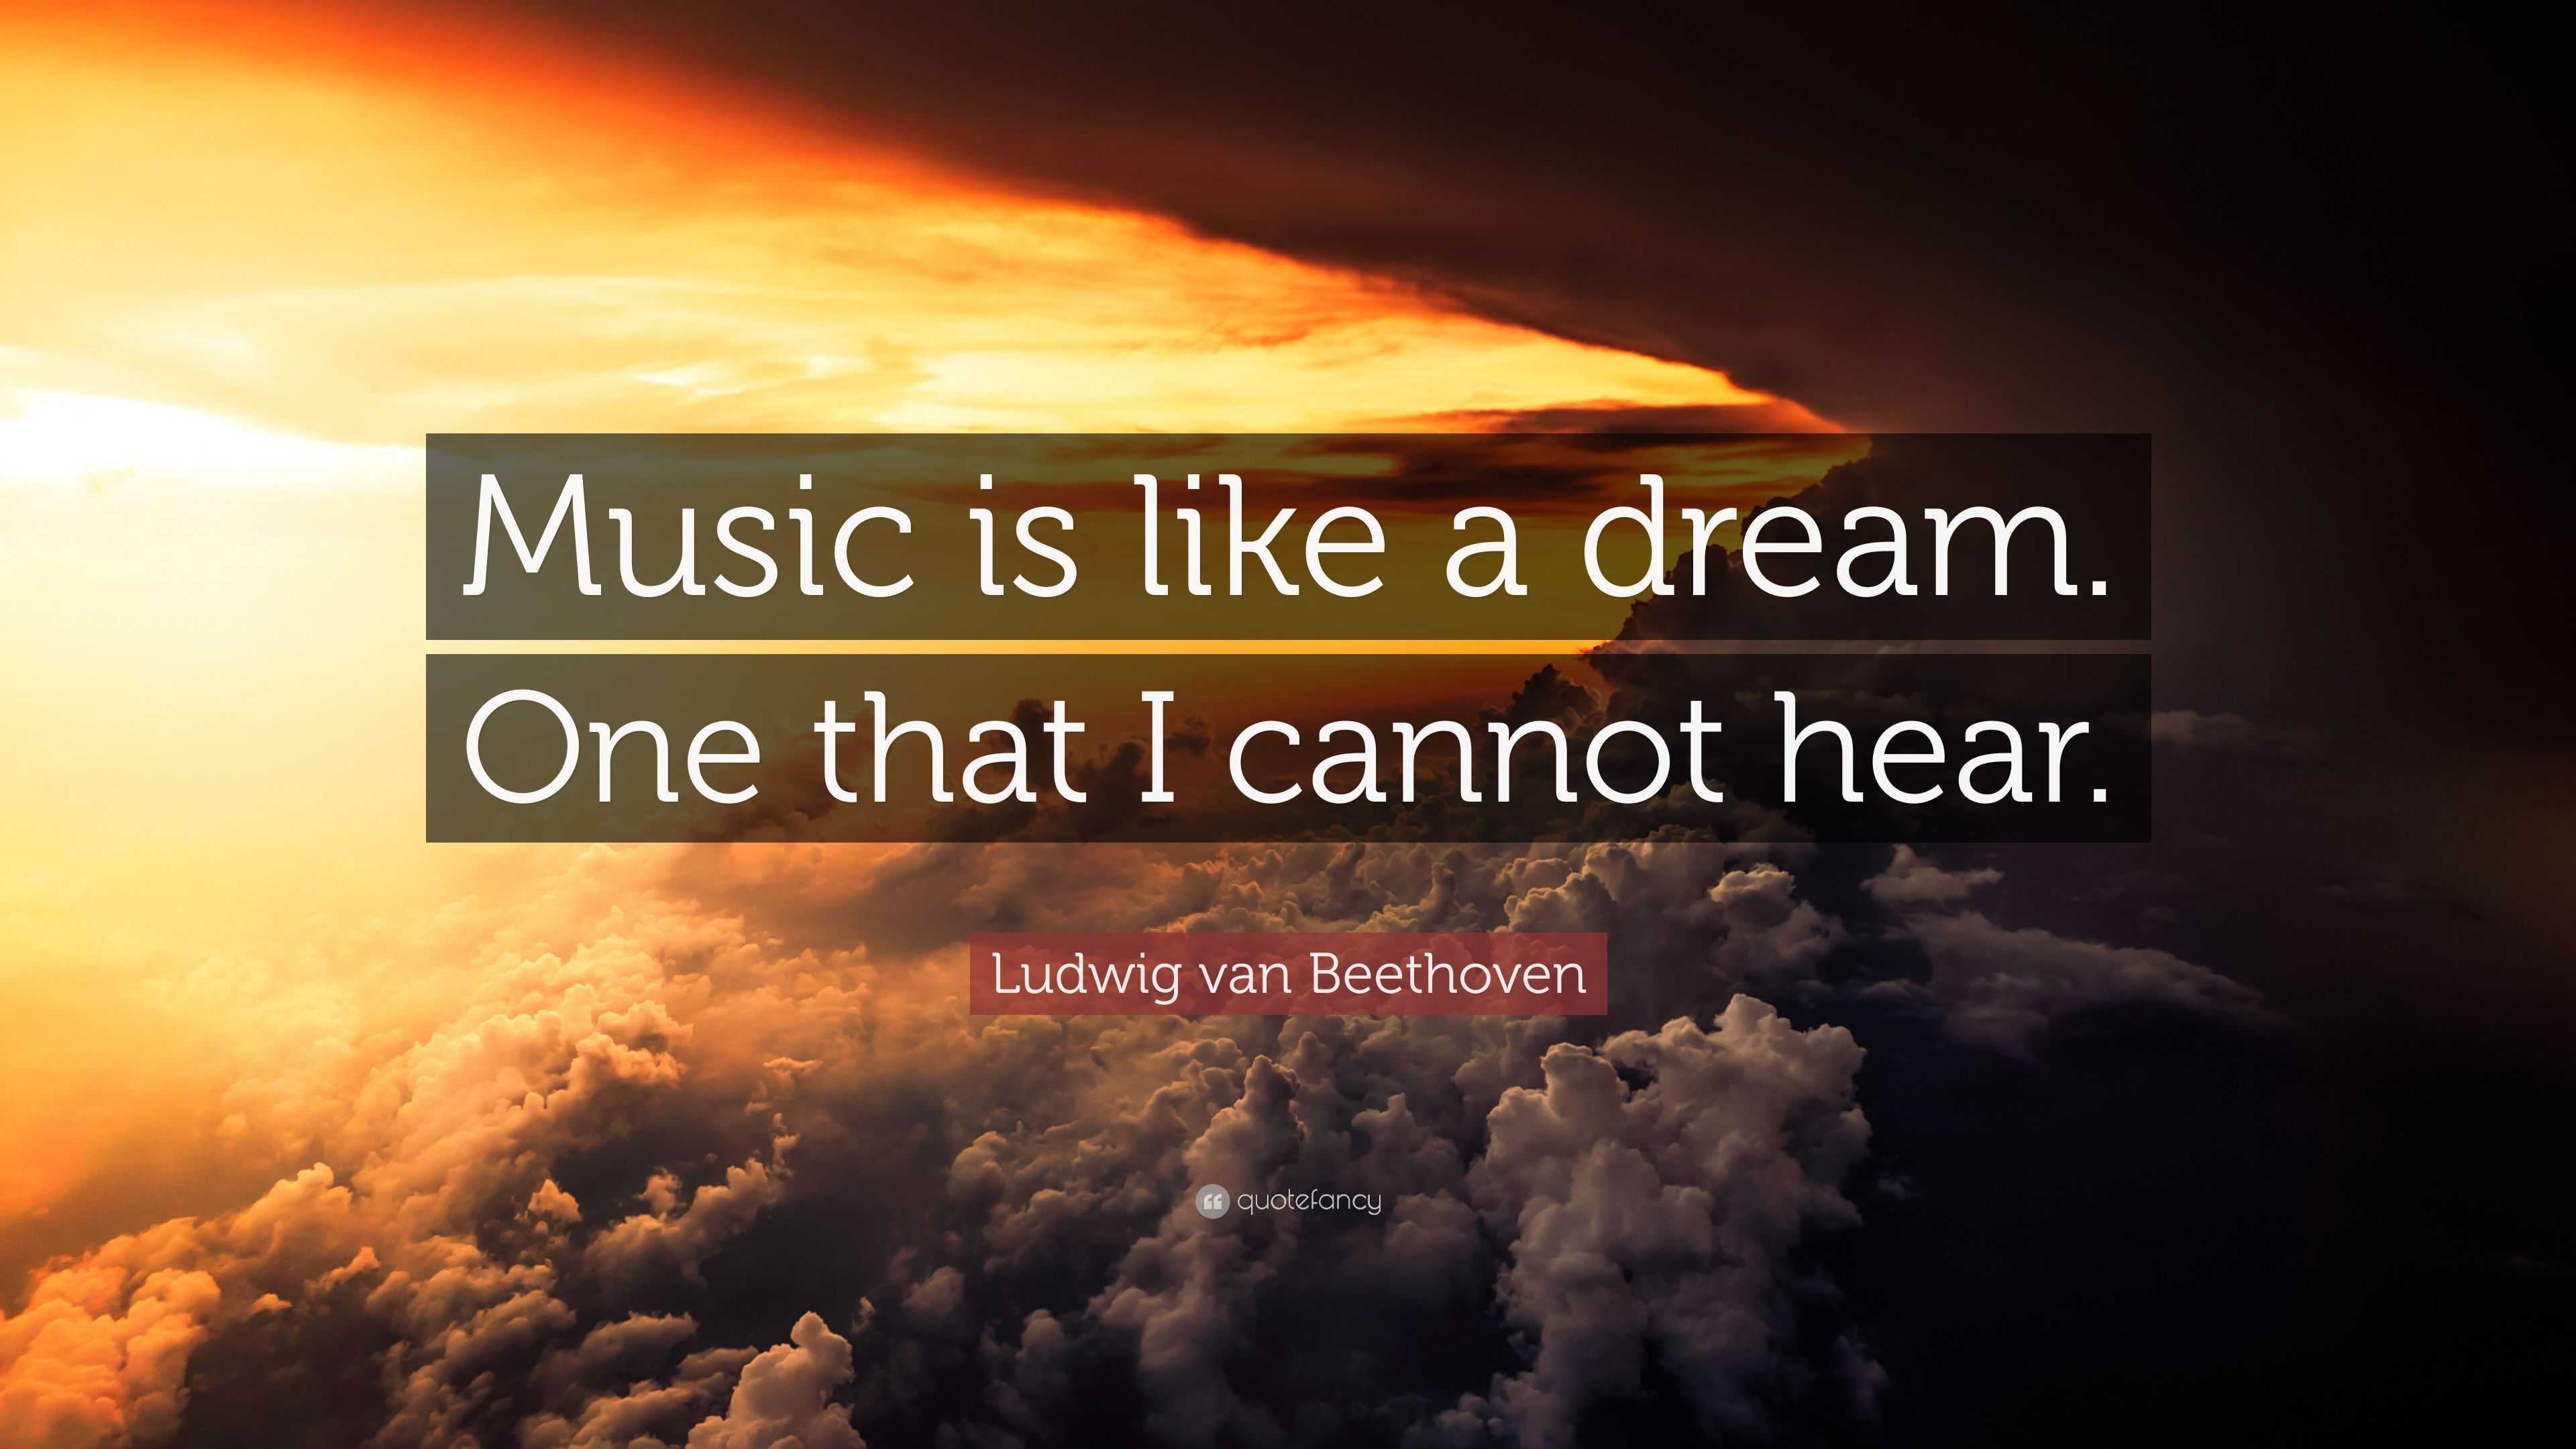 Ludwig van Beethoven Quote: “Music is like a dream. One that I cannot